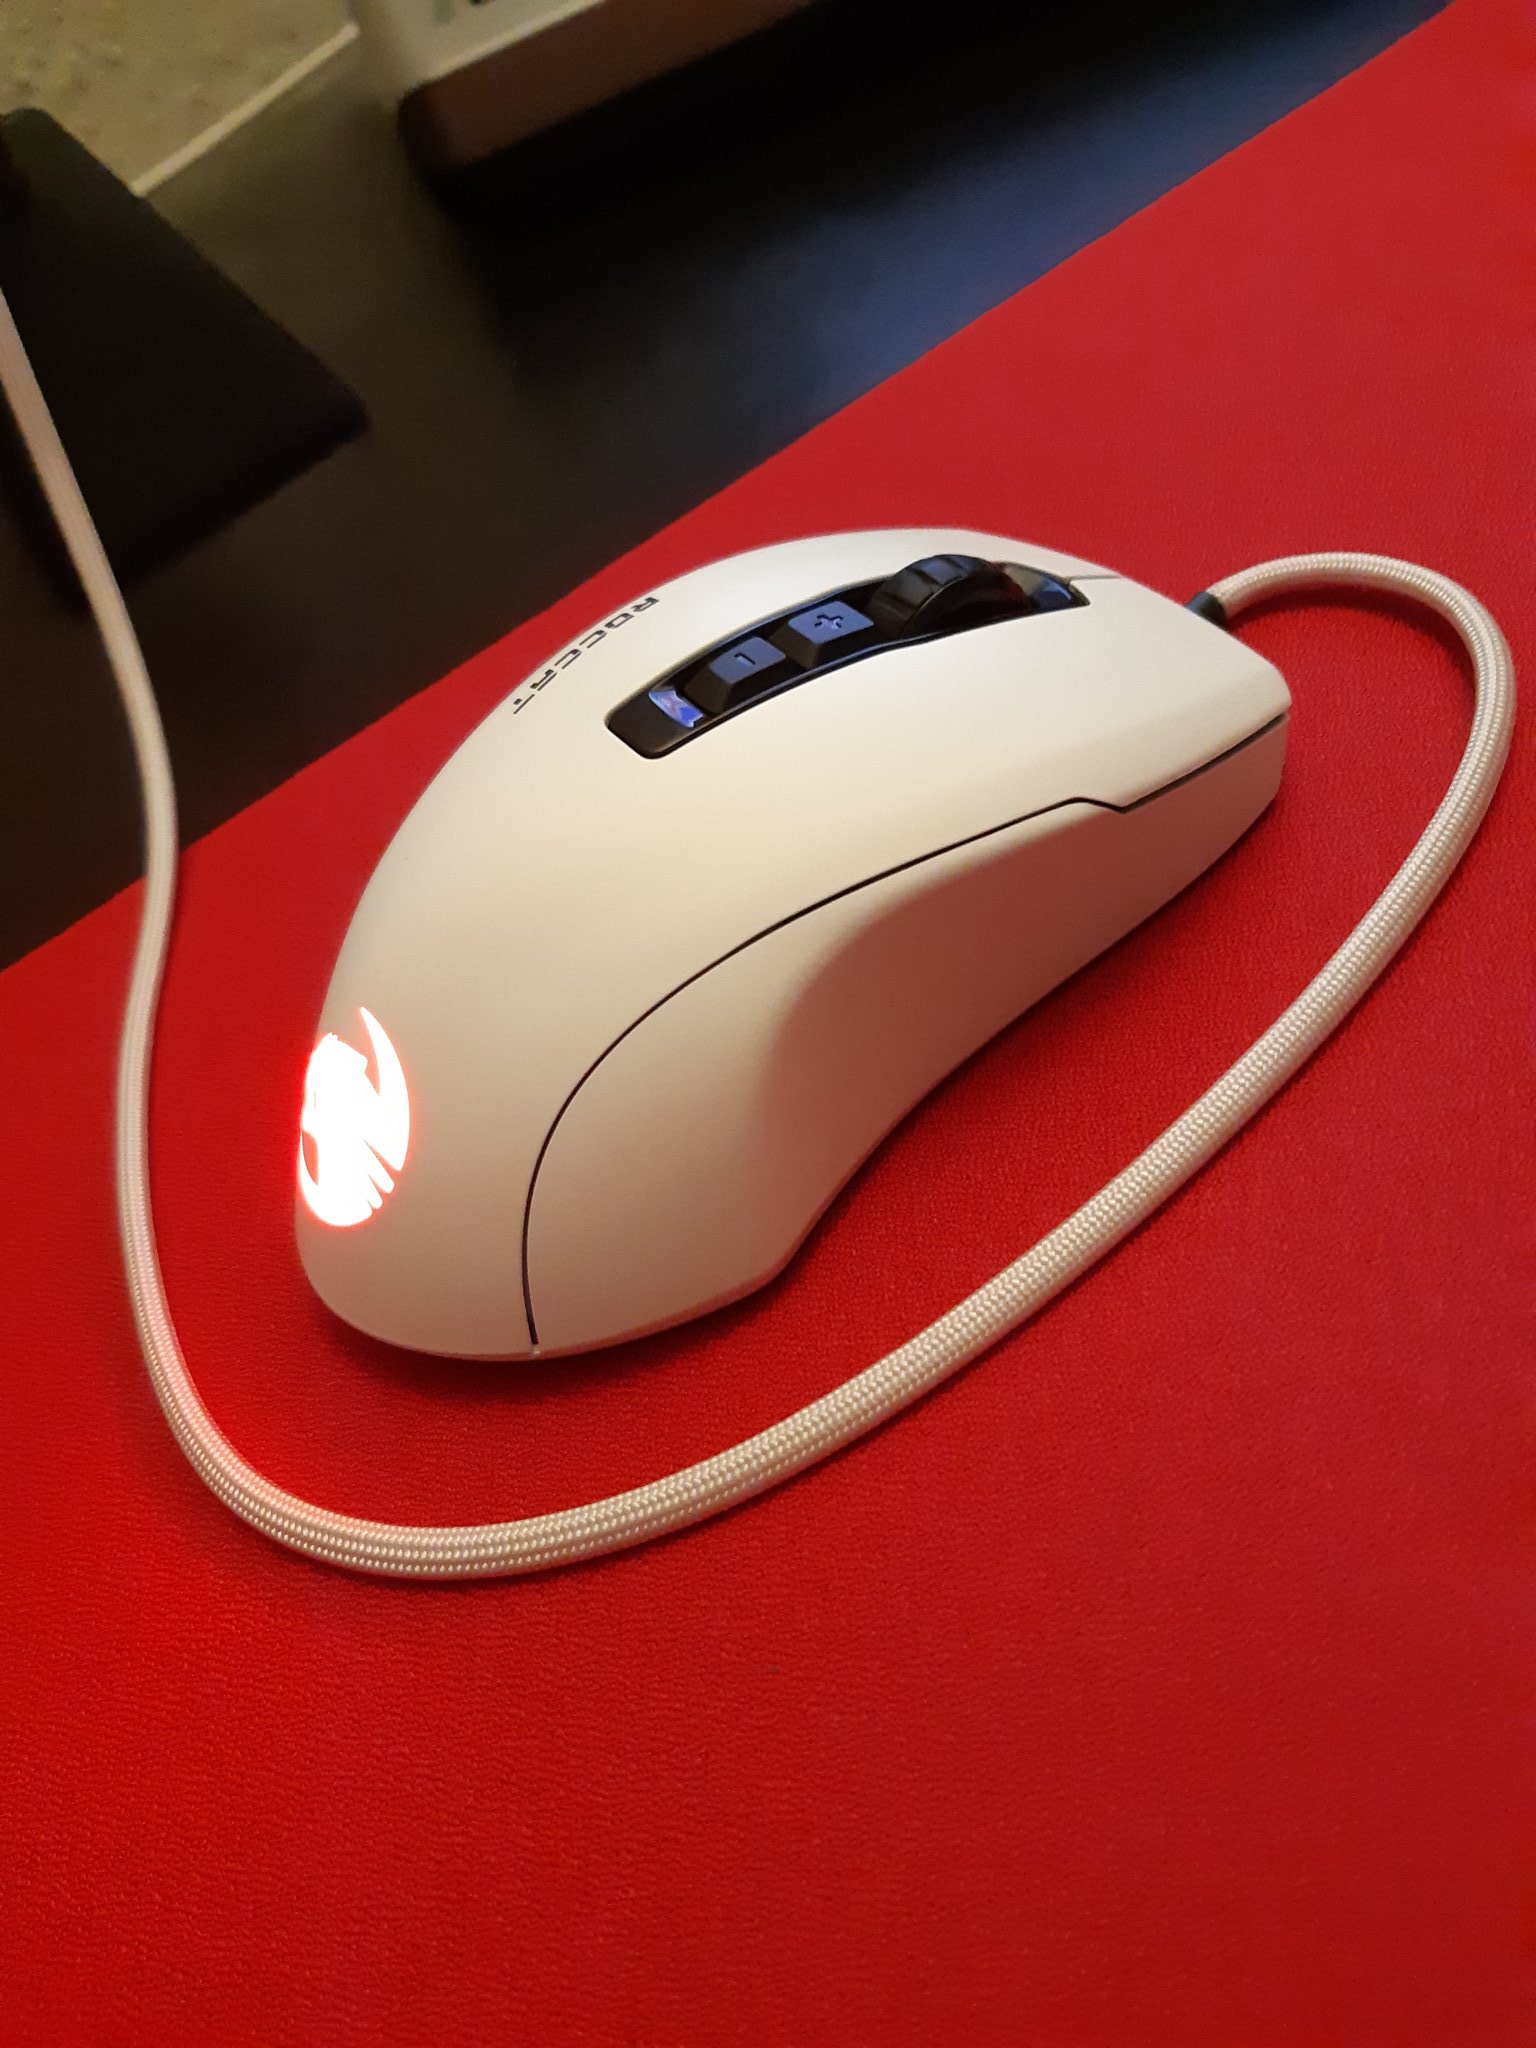 roccat wireless mouse